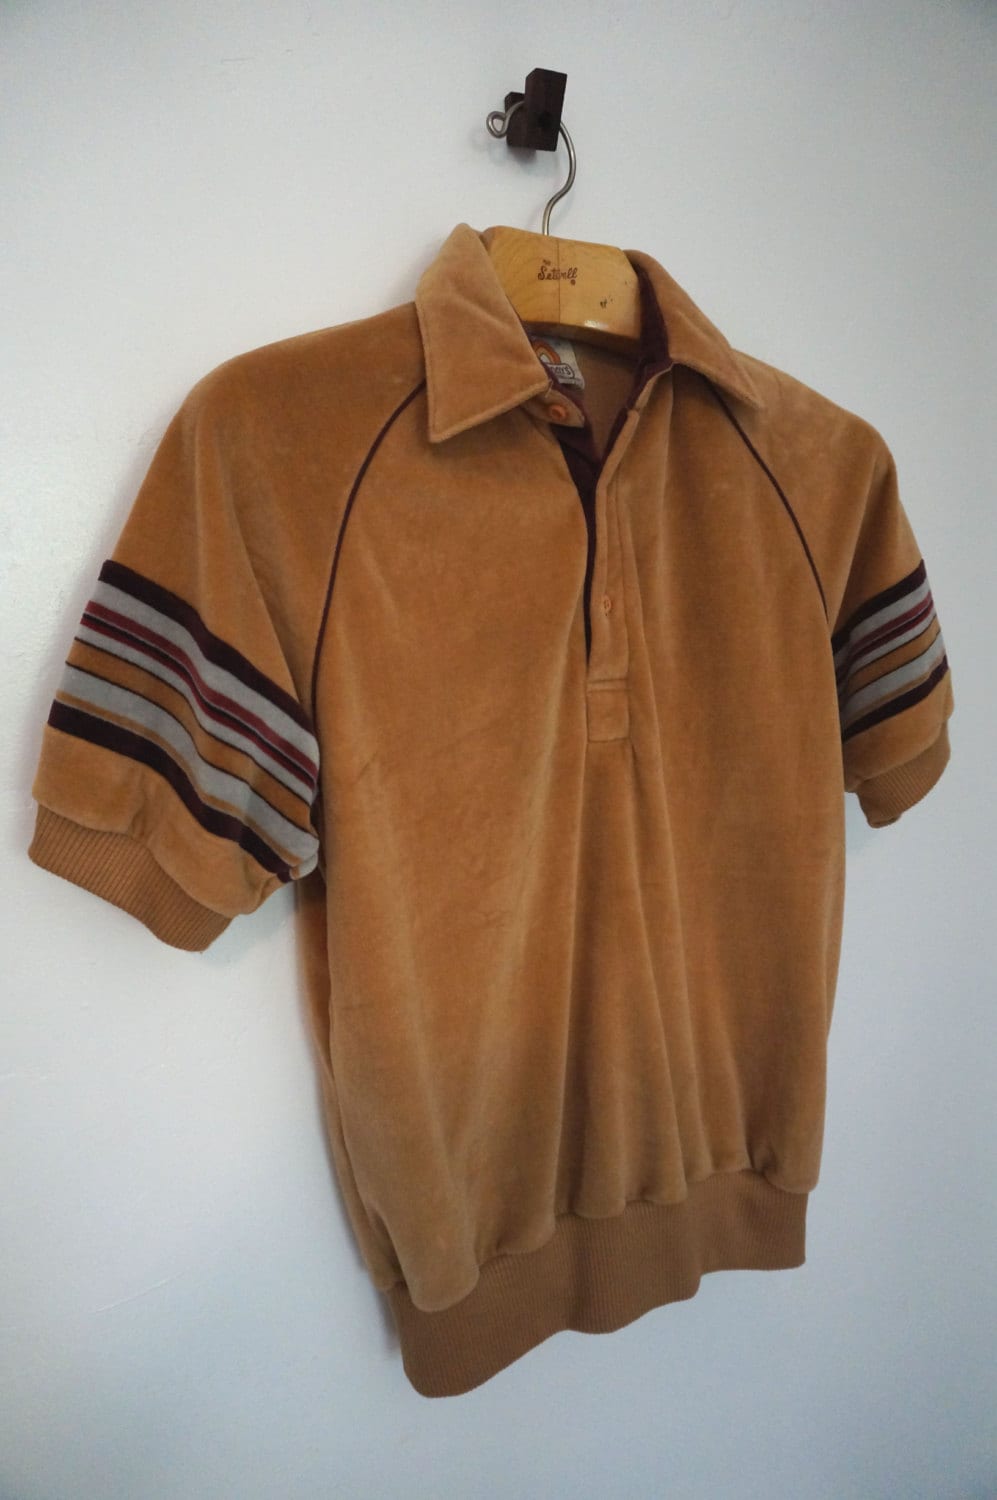 SALE was 28 Velour polo shirt by Saturdays in by WaterPlusMoon